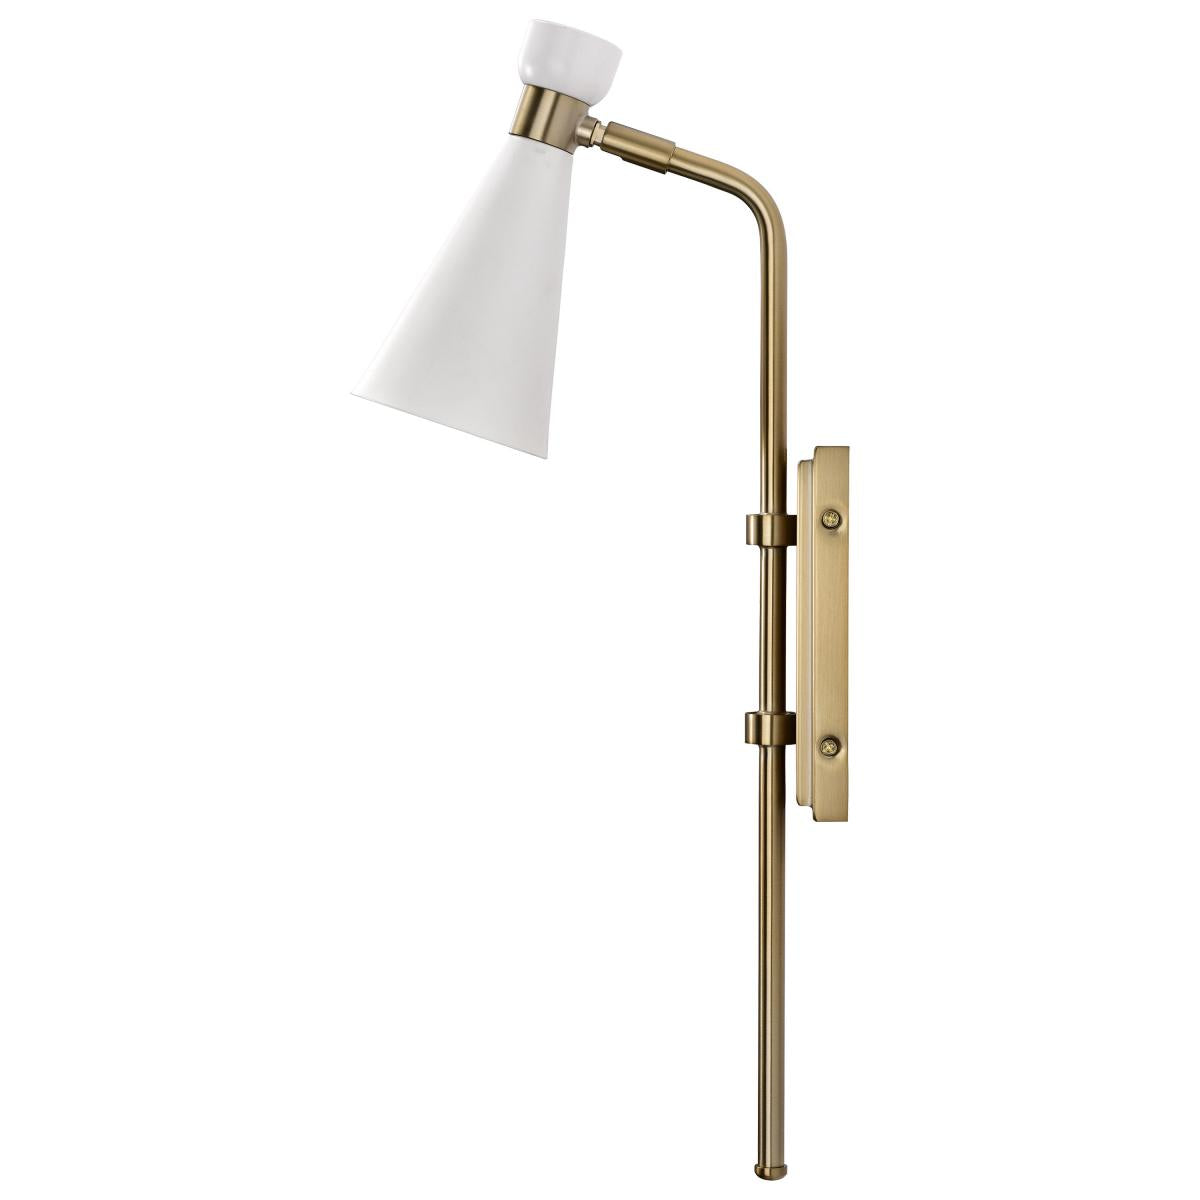 Prospect - 1 Light Wall Sconce with Matte White - Burnished Brass Finish